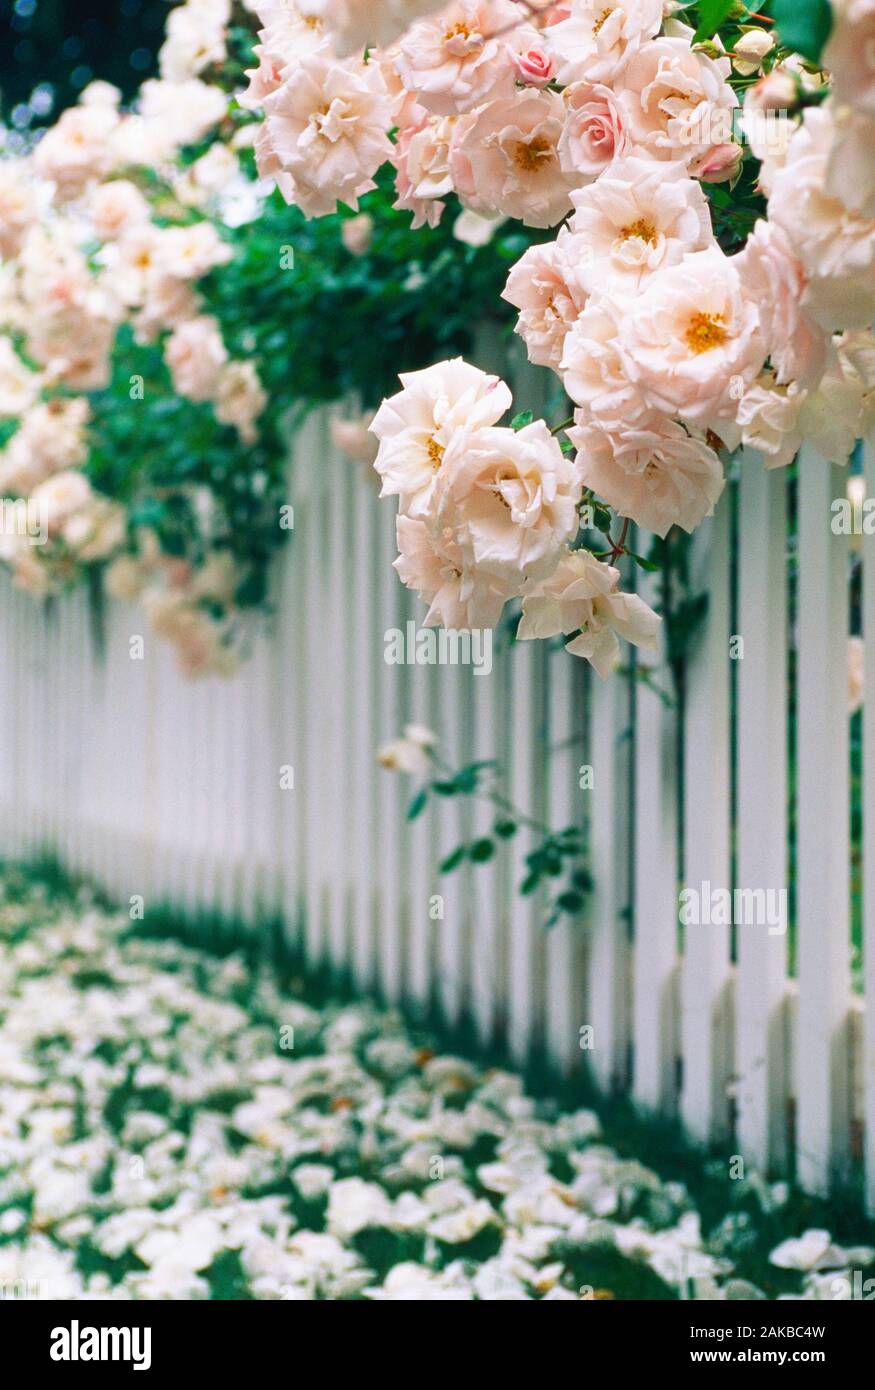 Pink rose flowers hanging over white picket fence, Nantucket, Massachusetts, USA Stock Photo